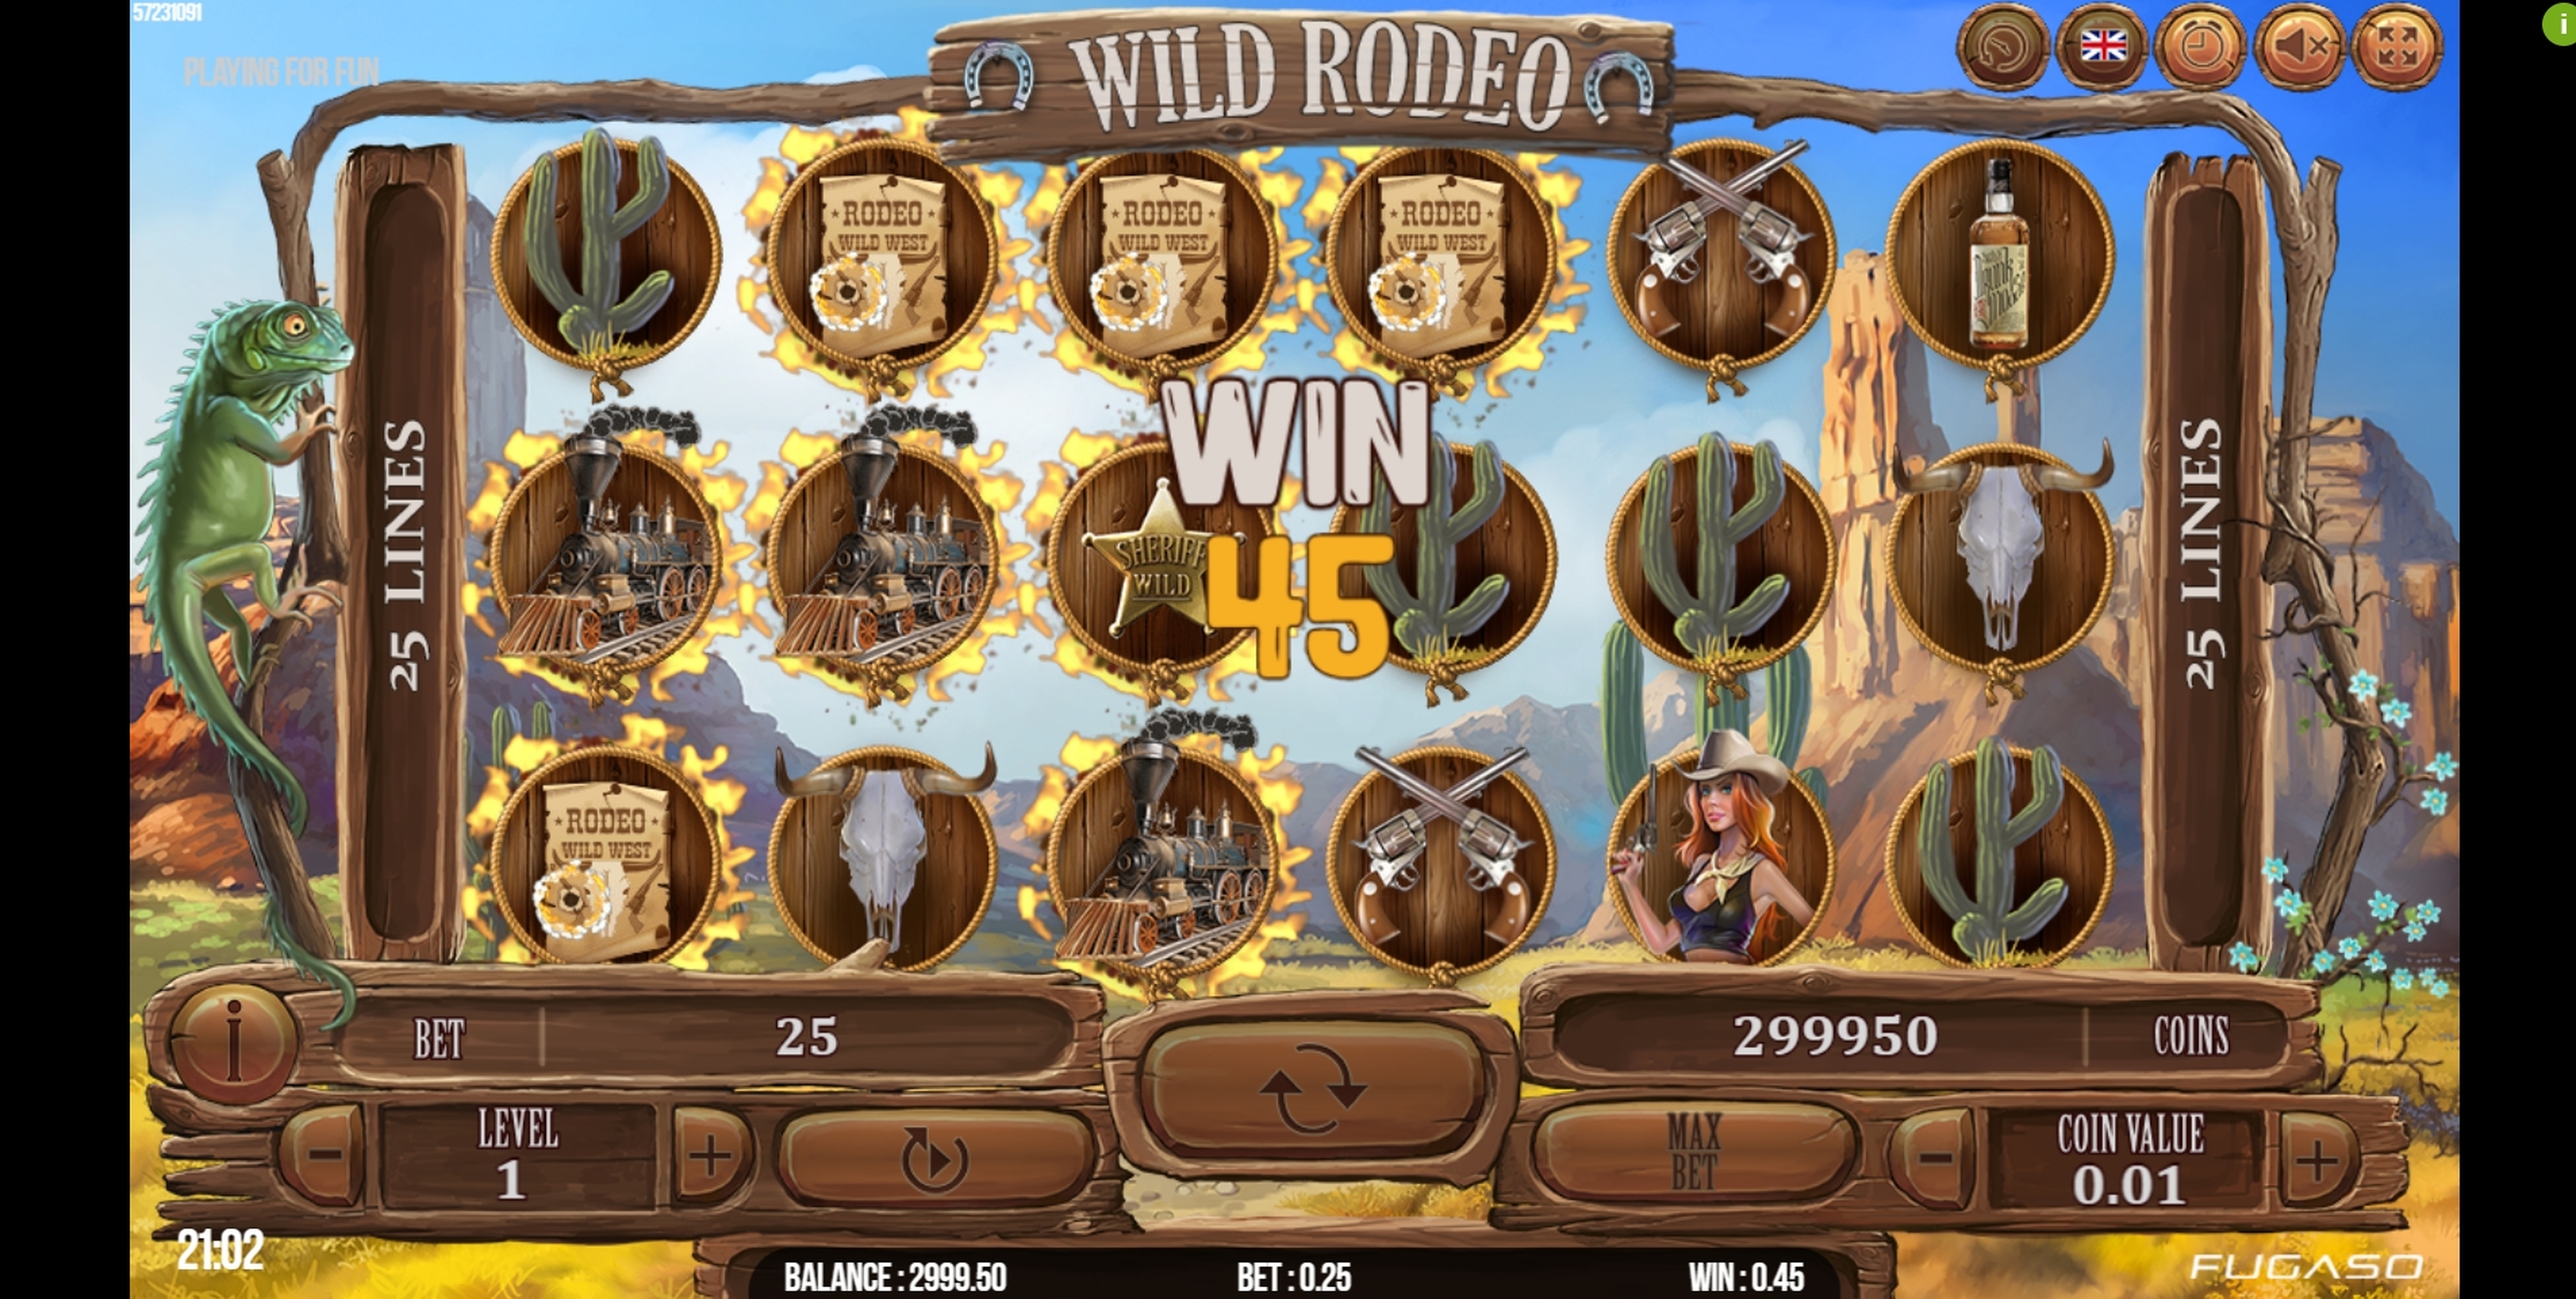 Win Money in Wild Rodeo Free Slot Game by Fugaso